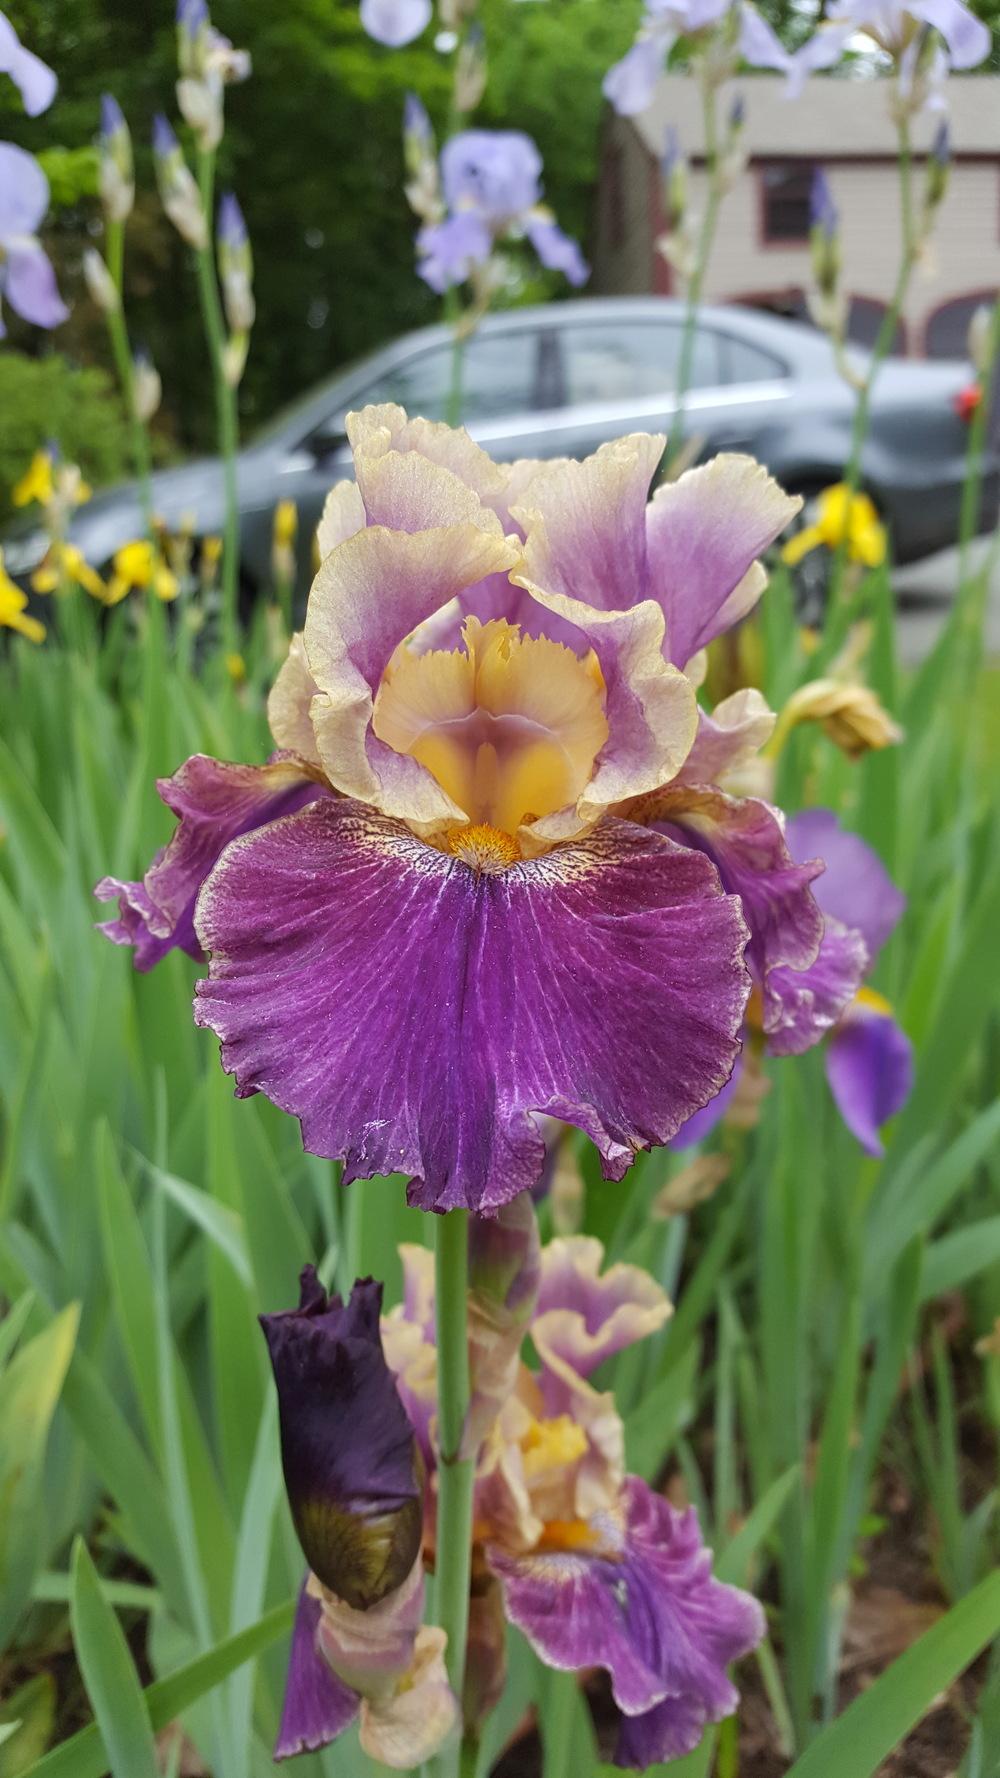 Photo of Tall Bearded Iris (Iris 'Let's Be Friends') uploaded by Dachsylady86